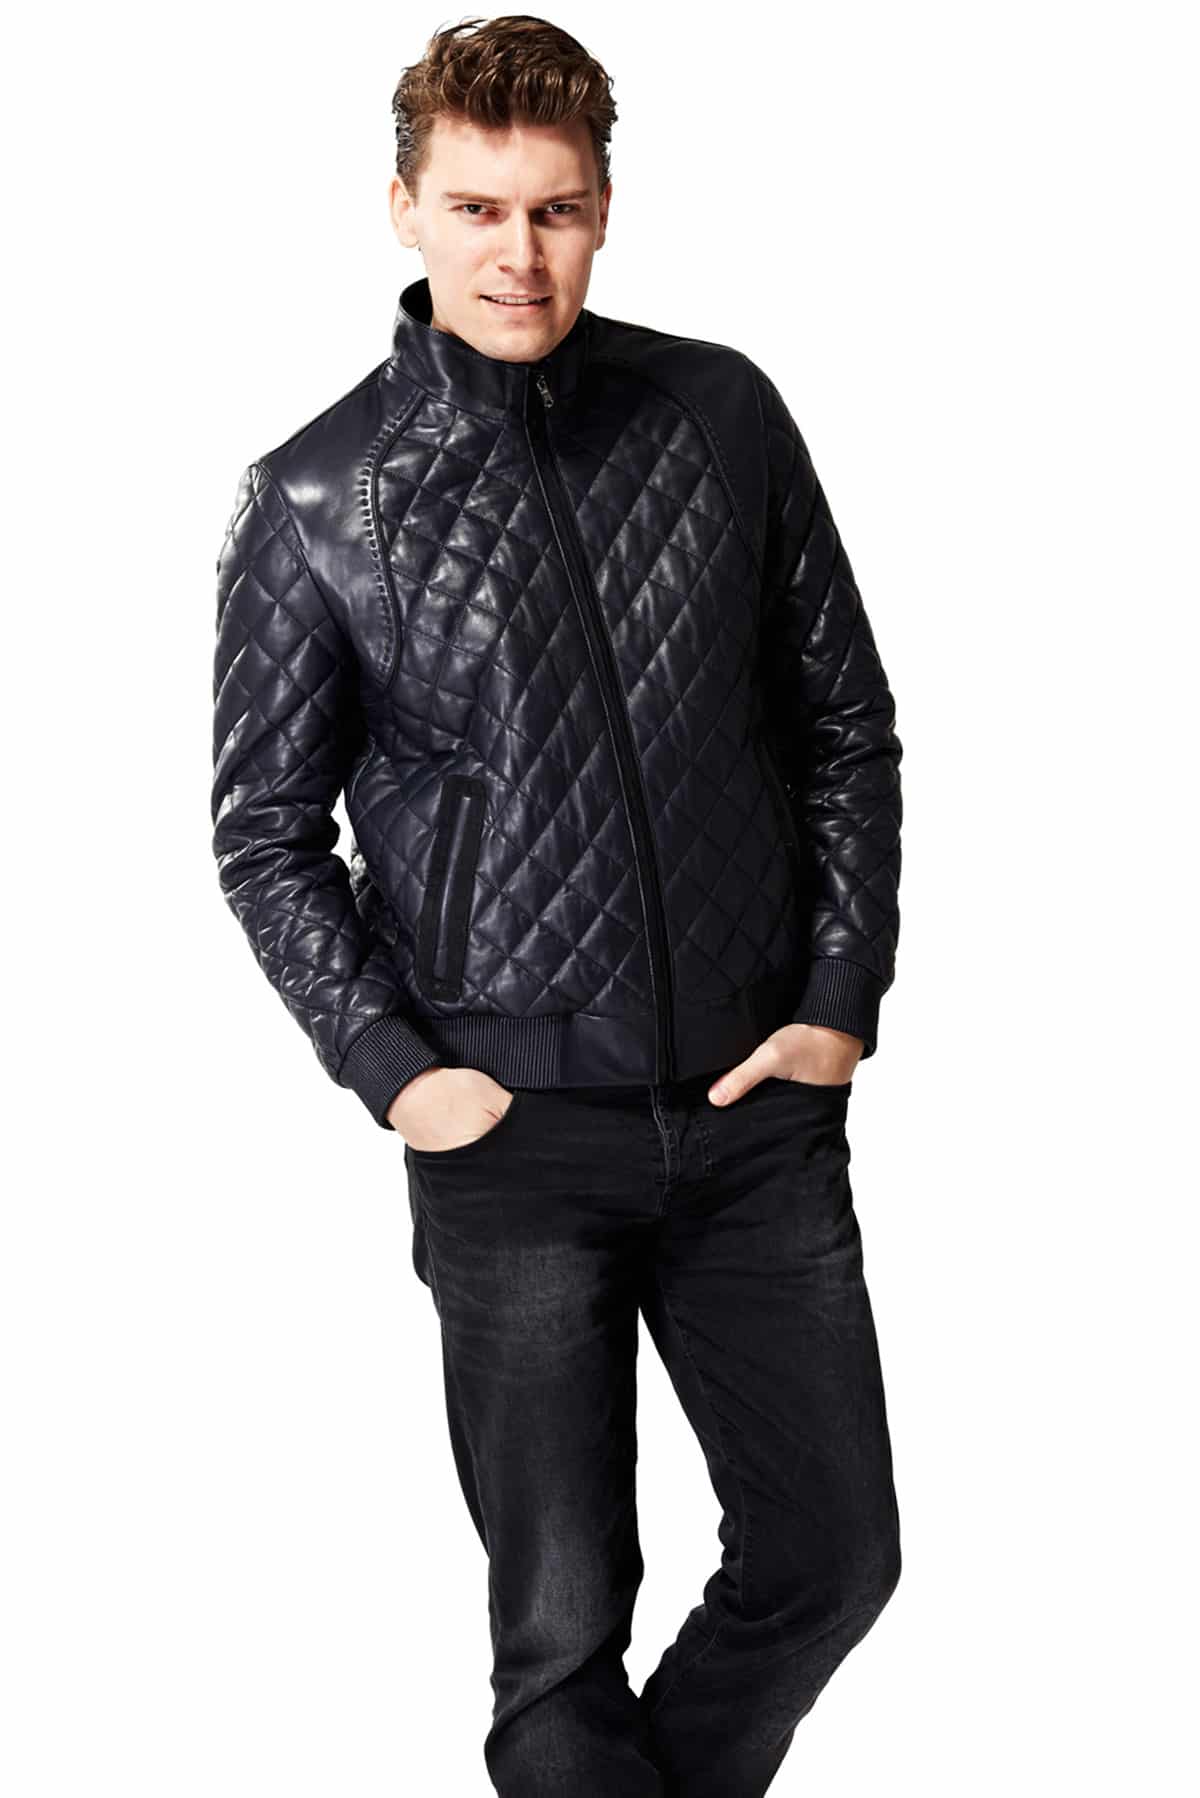 Quilted Black Bomber Leather Jacket - Embroidered Jacket USA